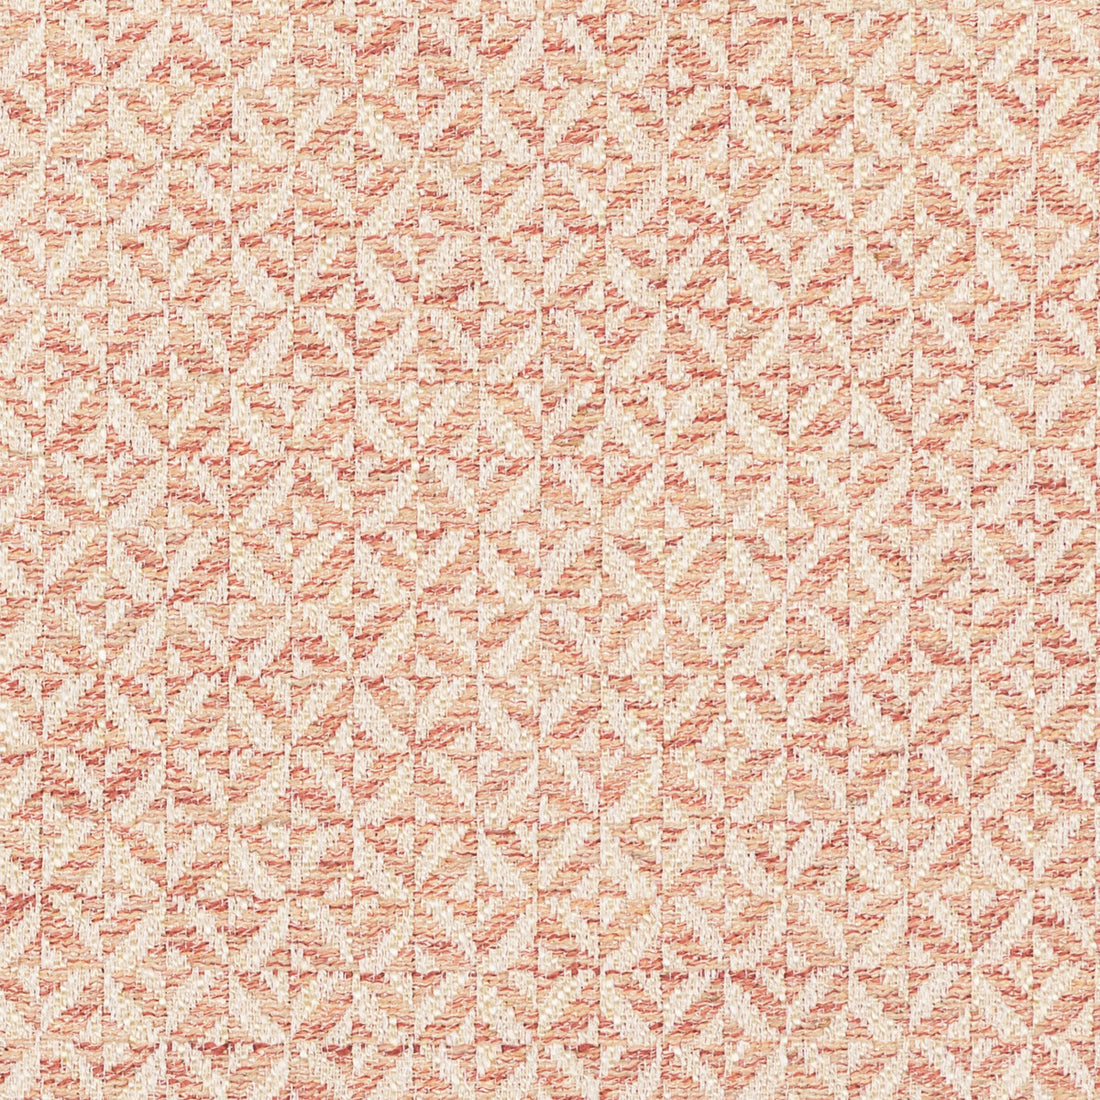 Triana Weave fabric in petal color - pattern 2021105.7.0 - by Lee Jofa in the Triana Weaves collection